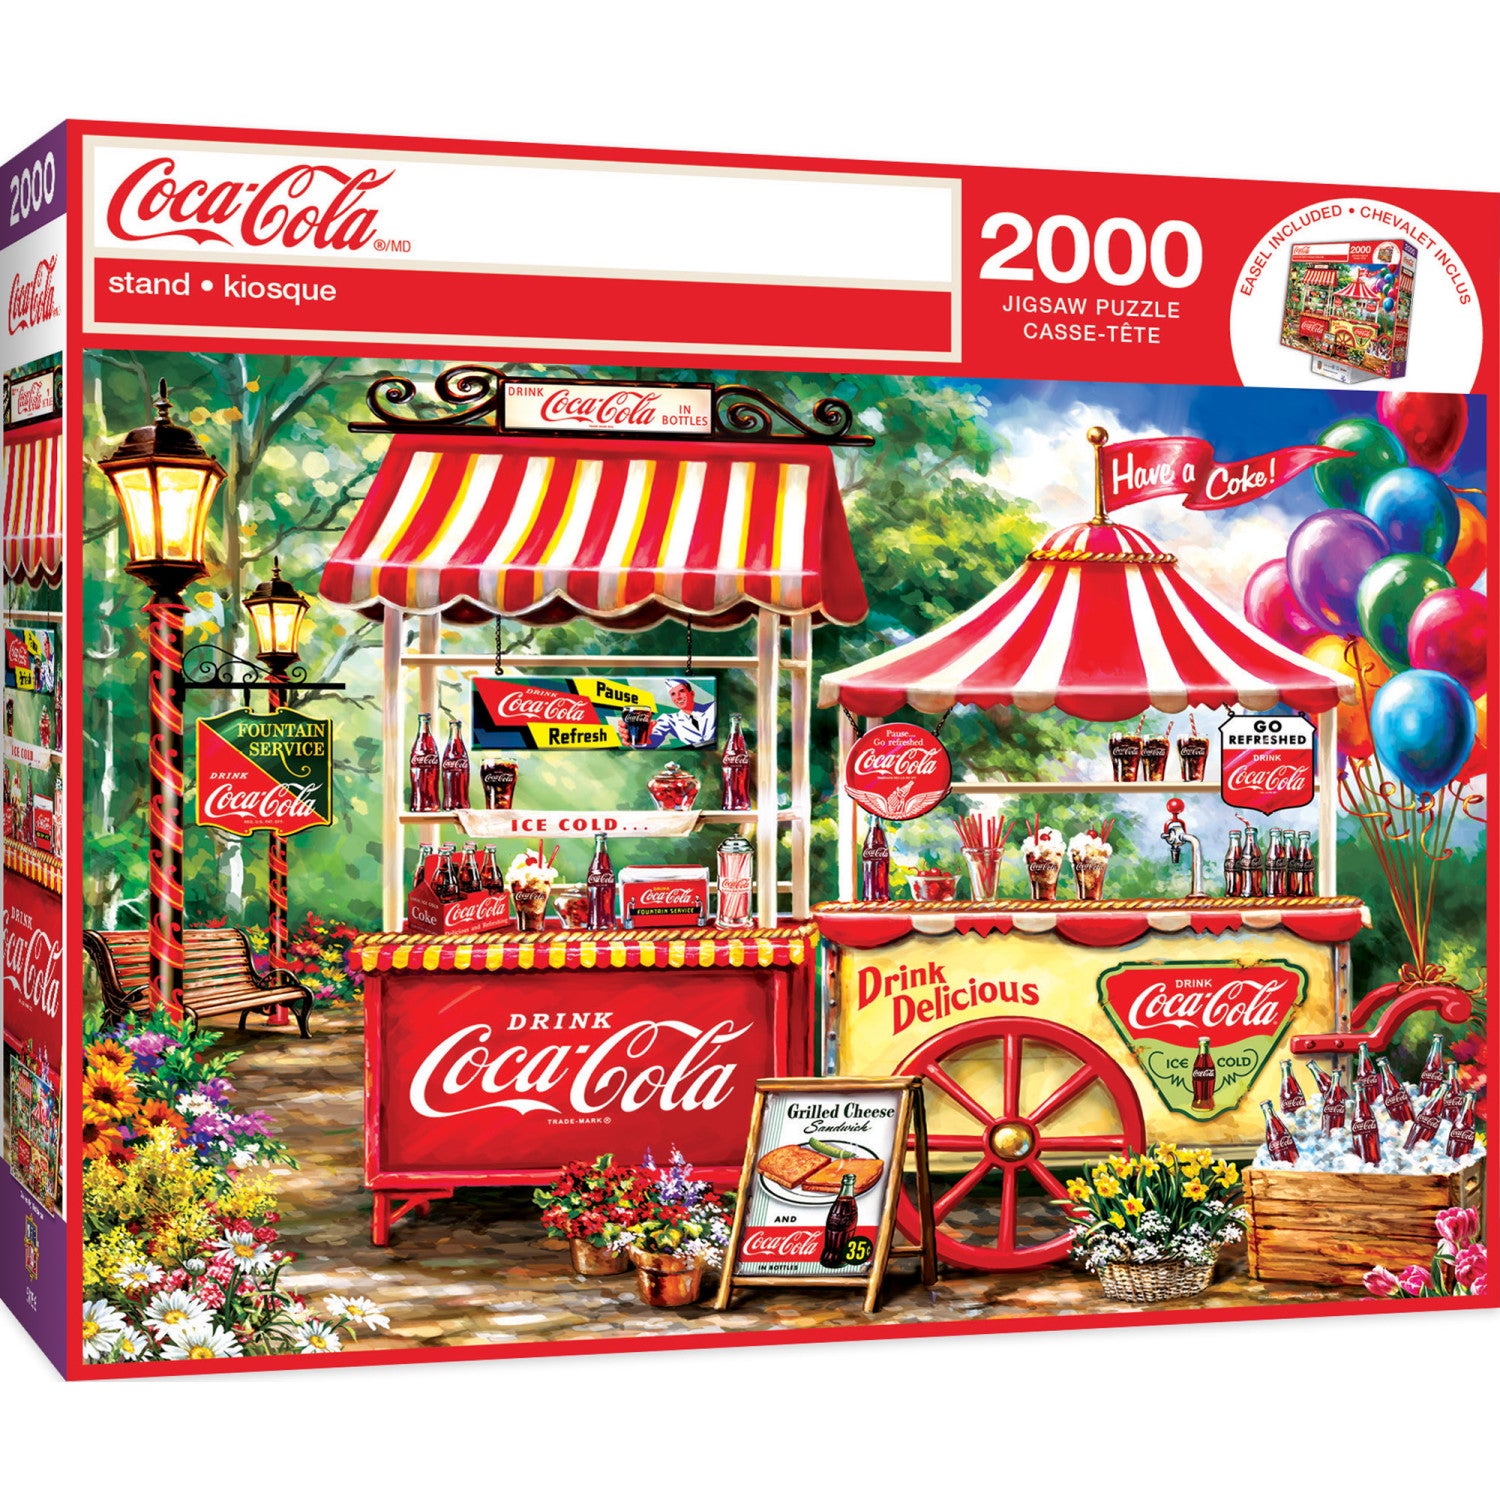 Puzzle Store Jigsaw - High Quality Puzzle 2000 pc.